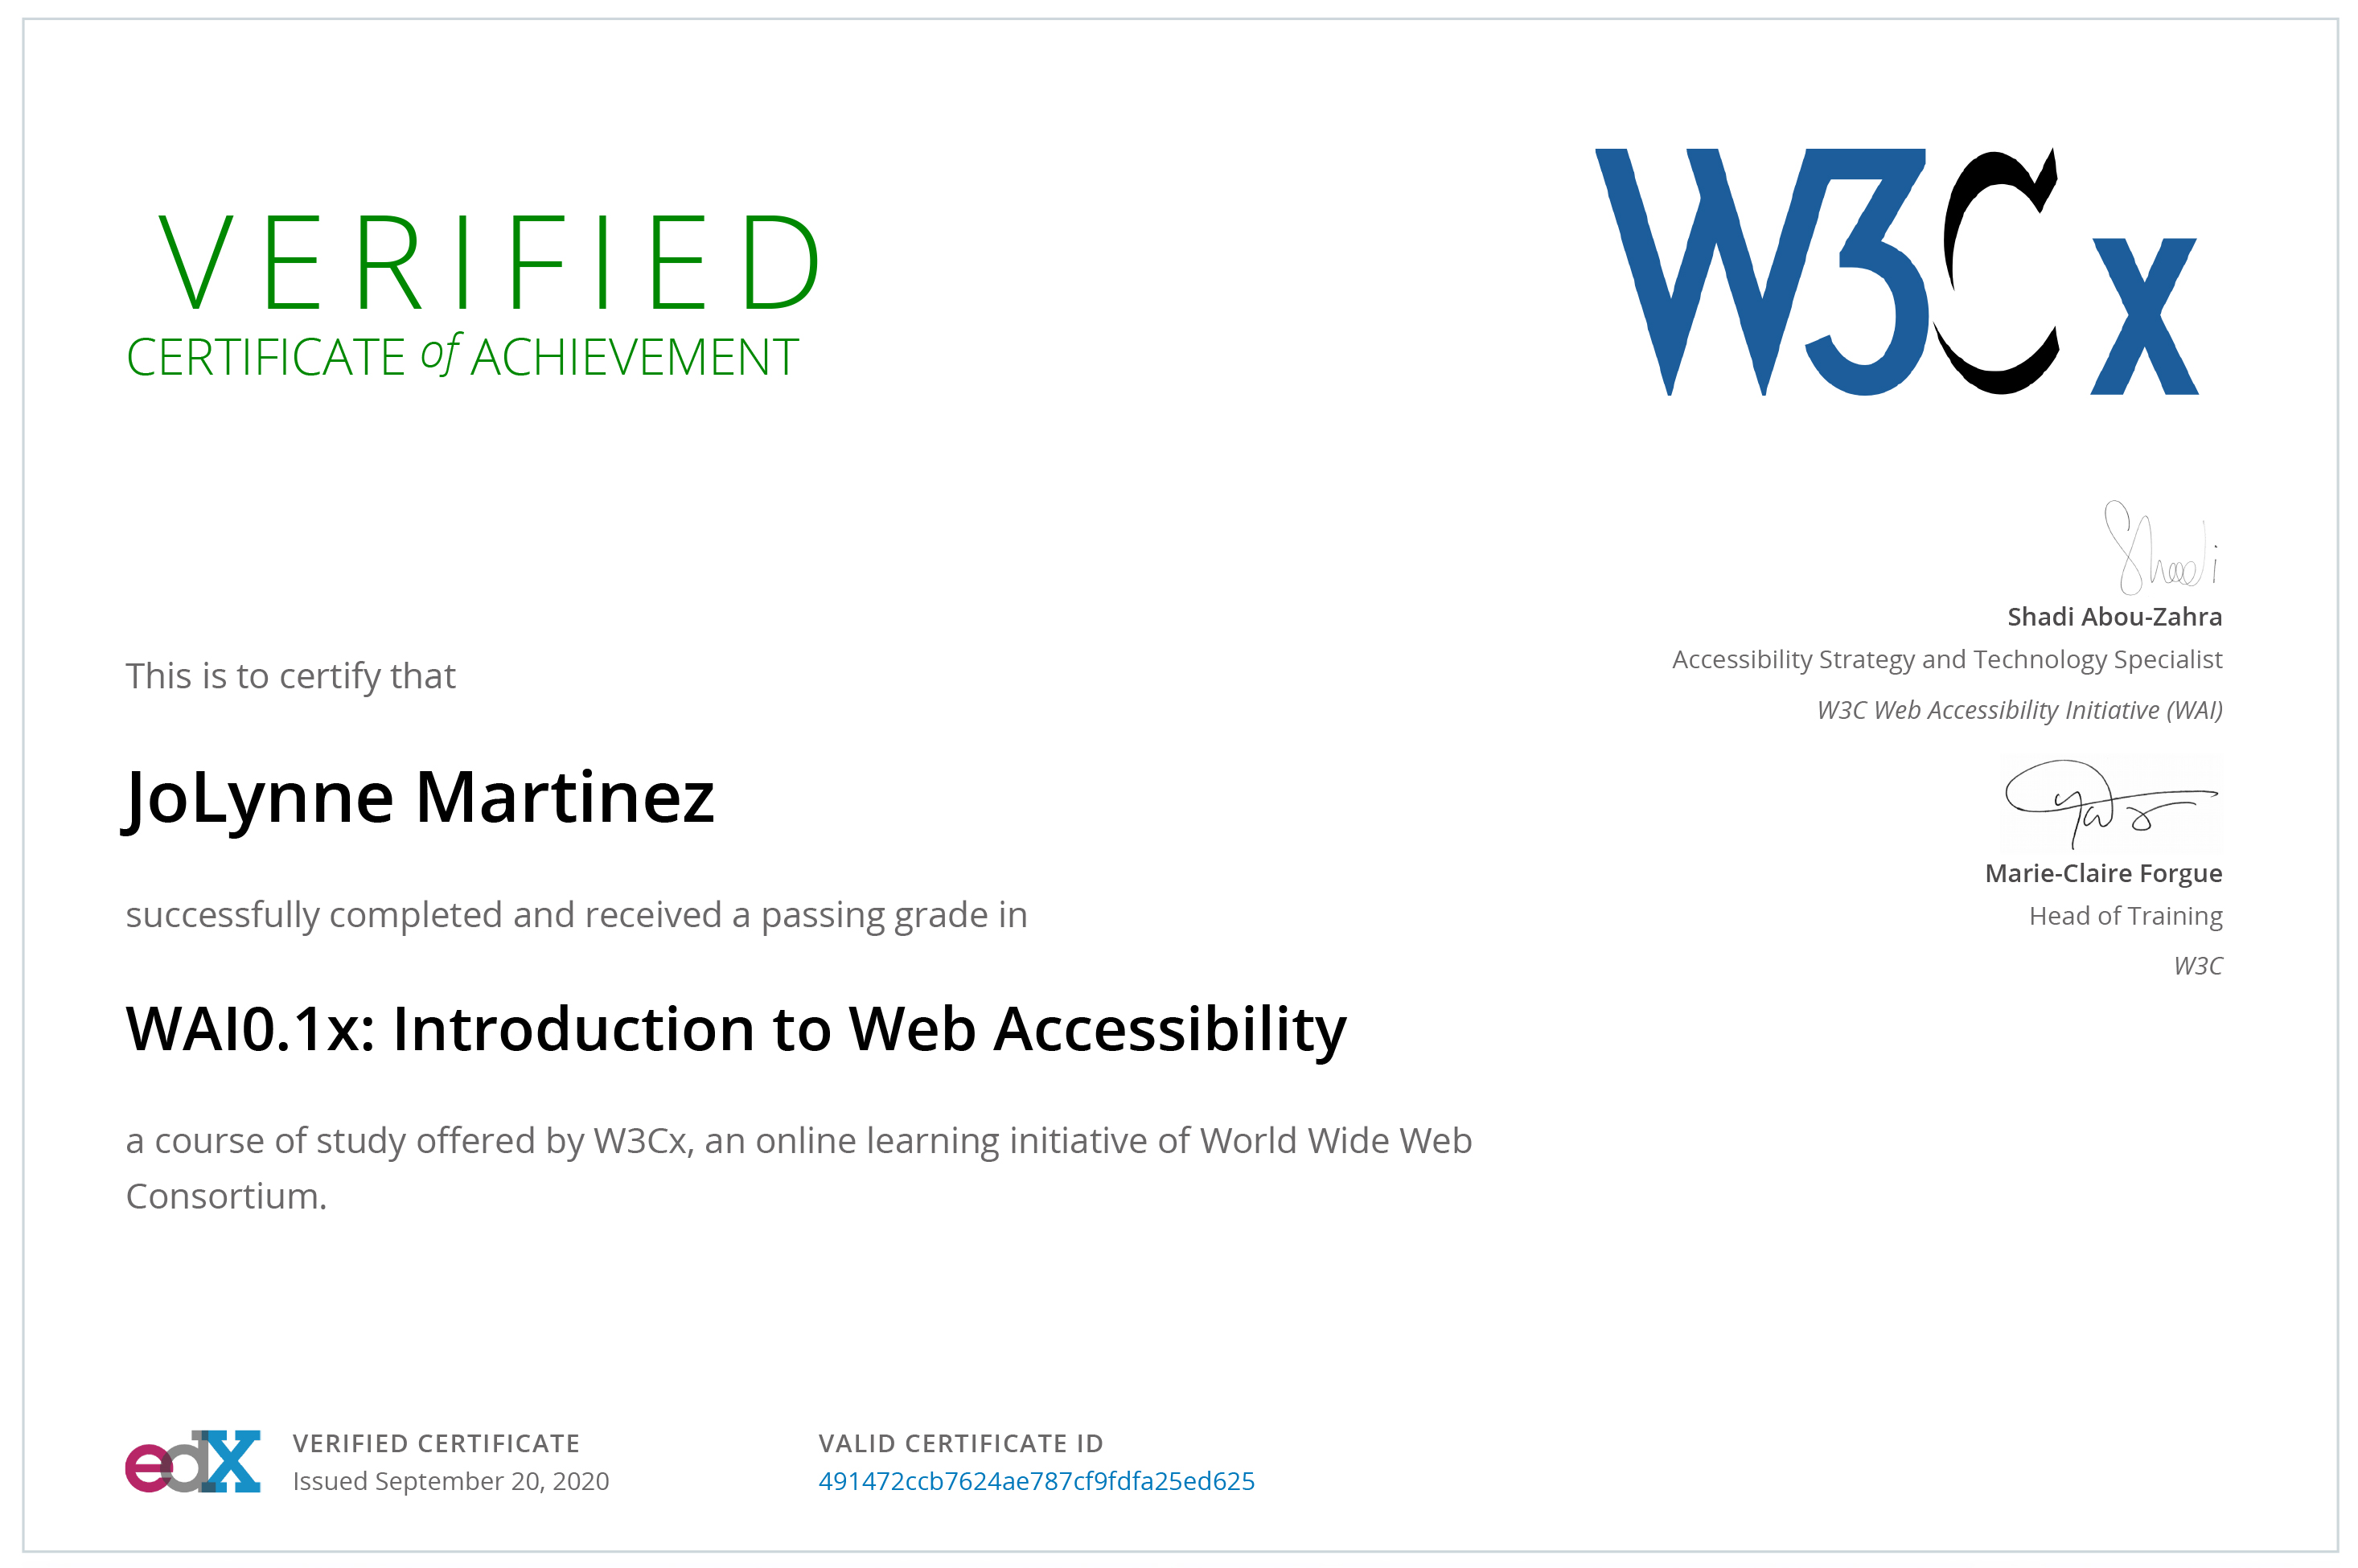 Certificate from W3C verifying JoLynne Martinez has successfully completed Introduction to Web Accessibility course